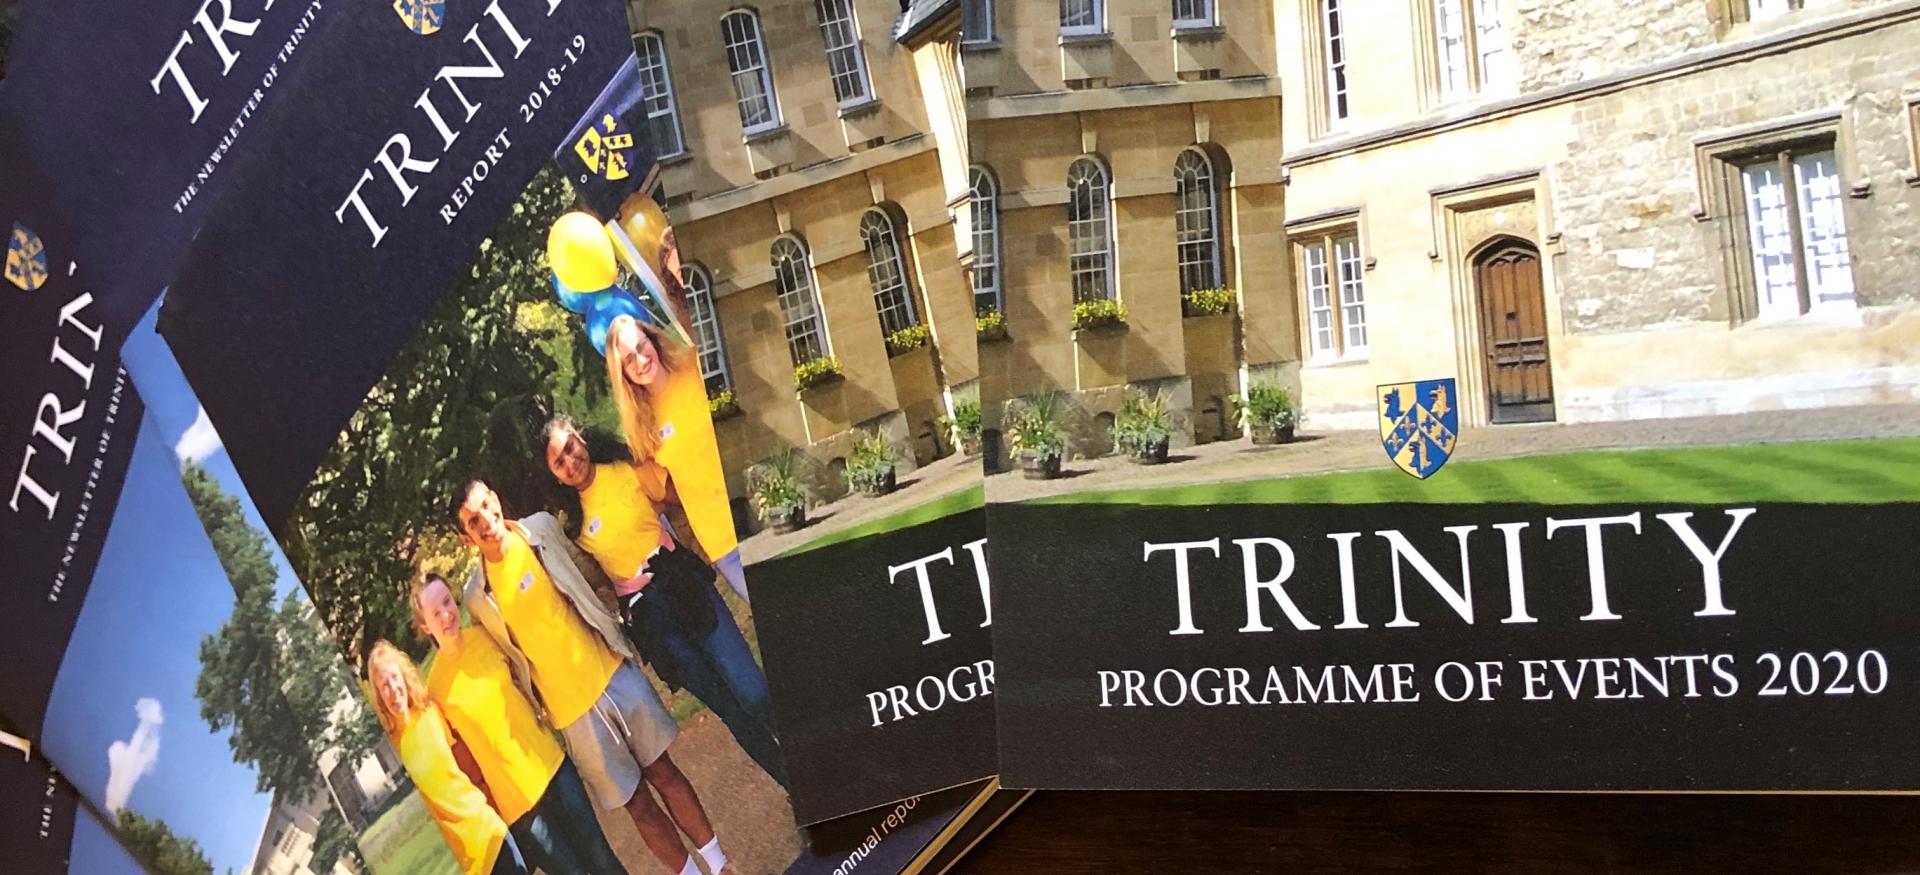 A display of Trinity College Development and Alumni publications on a table.